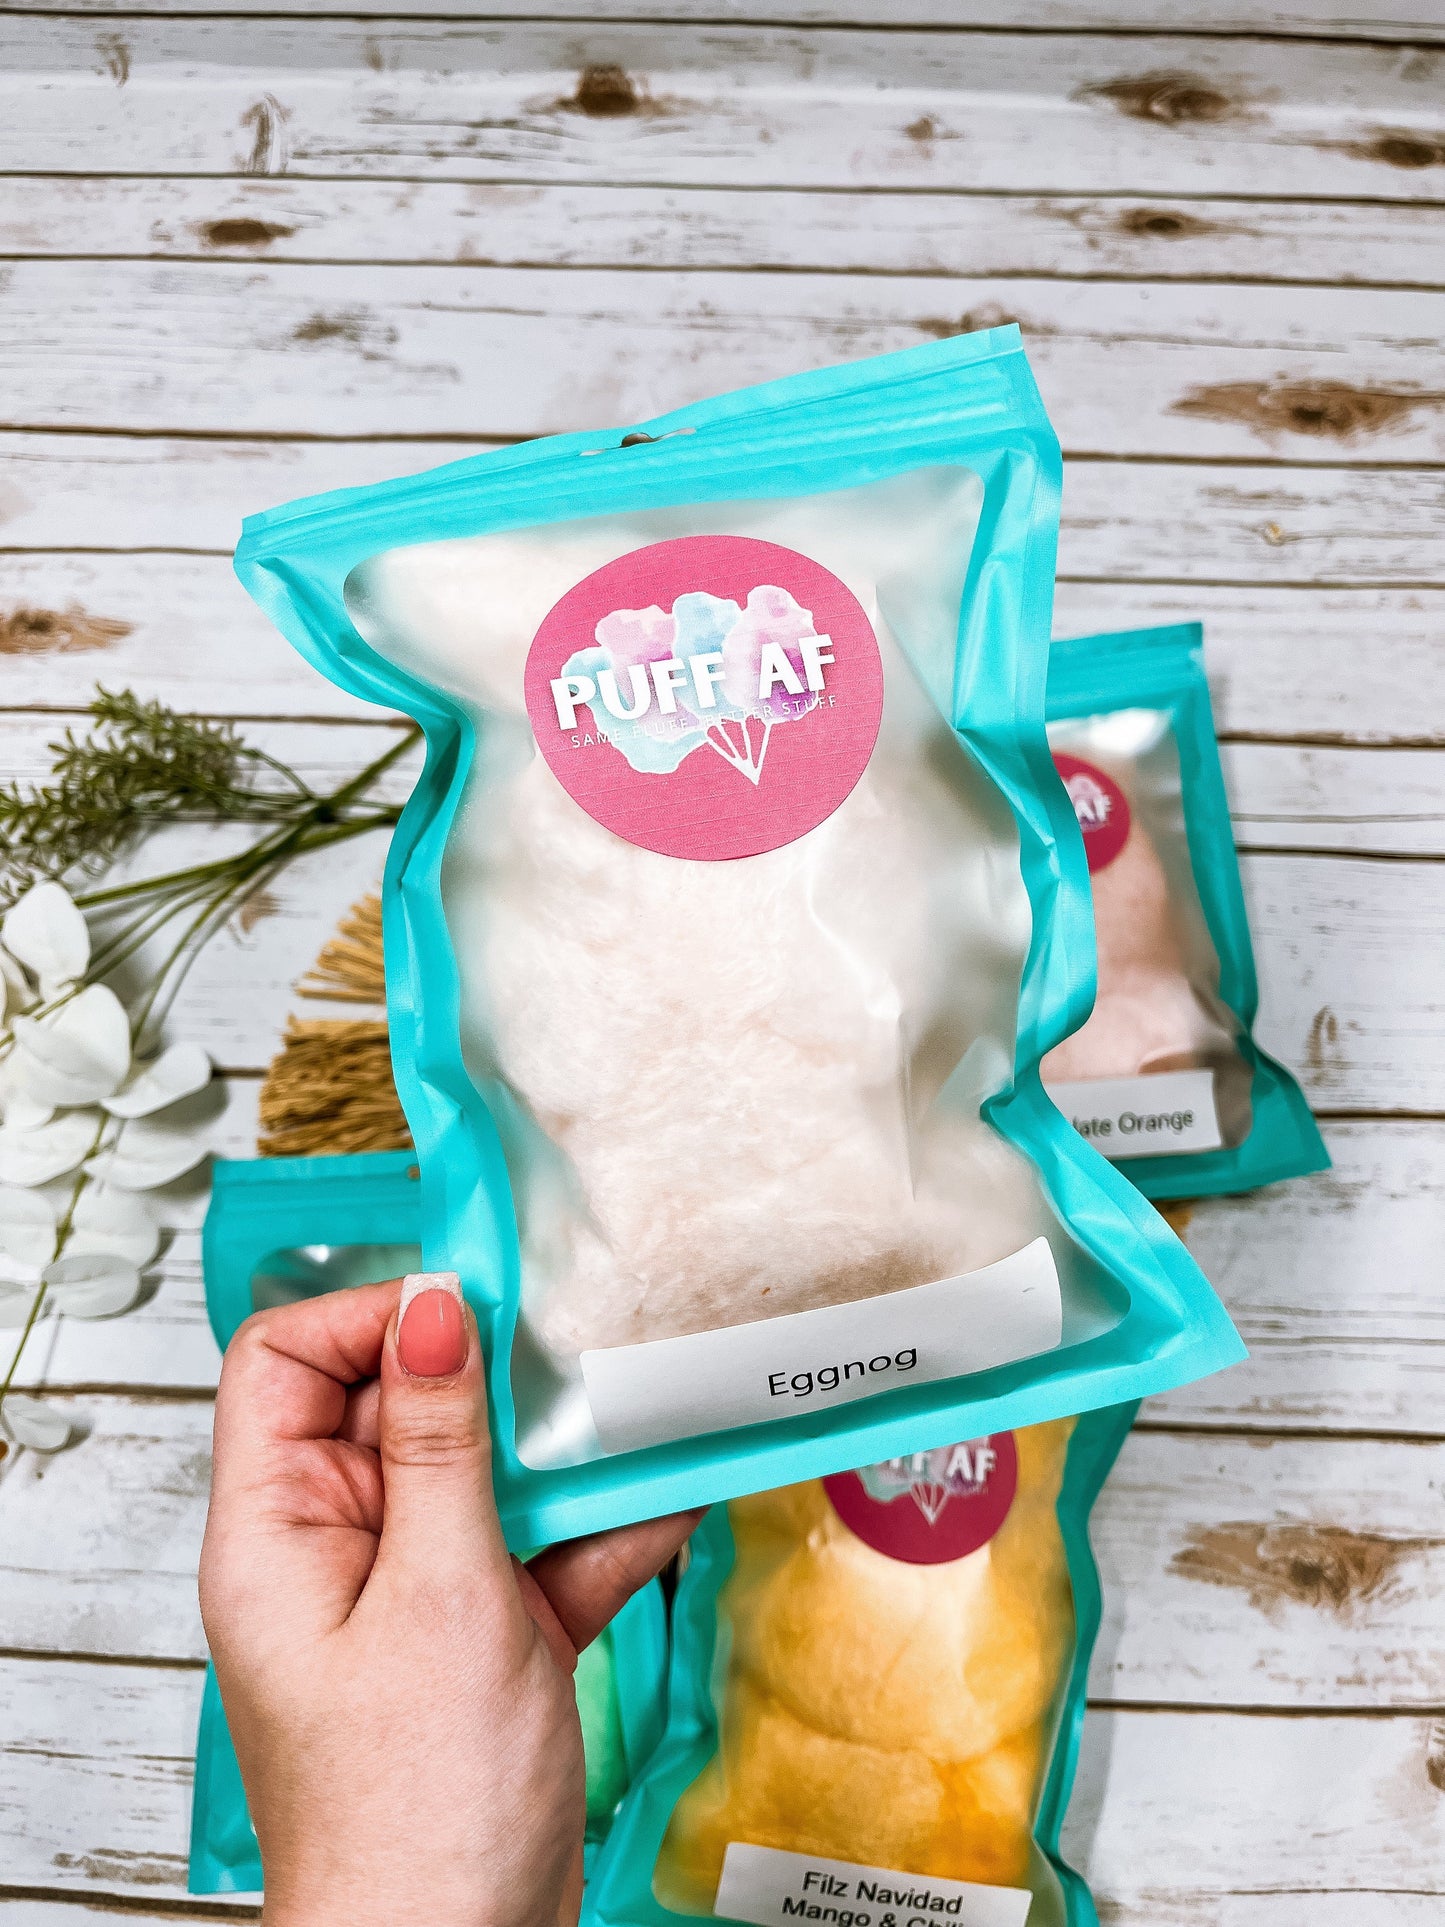 Puff Cotton Candy (AF - Allergy Free)